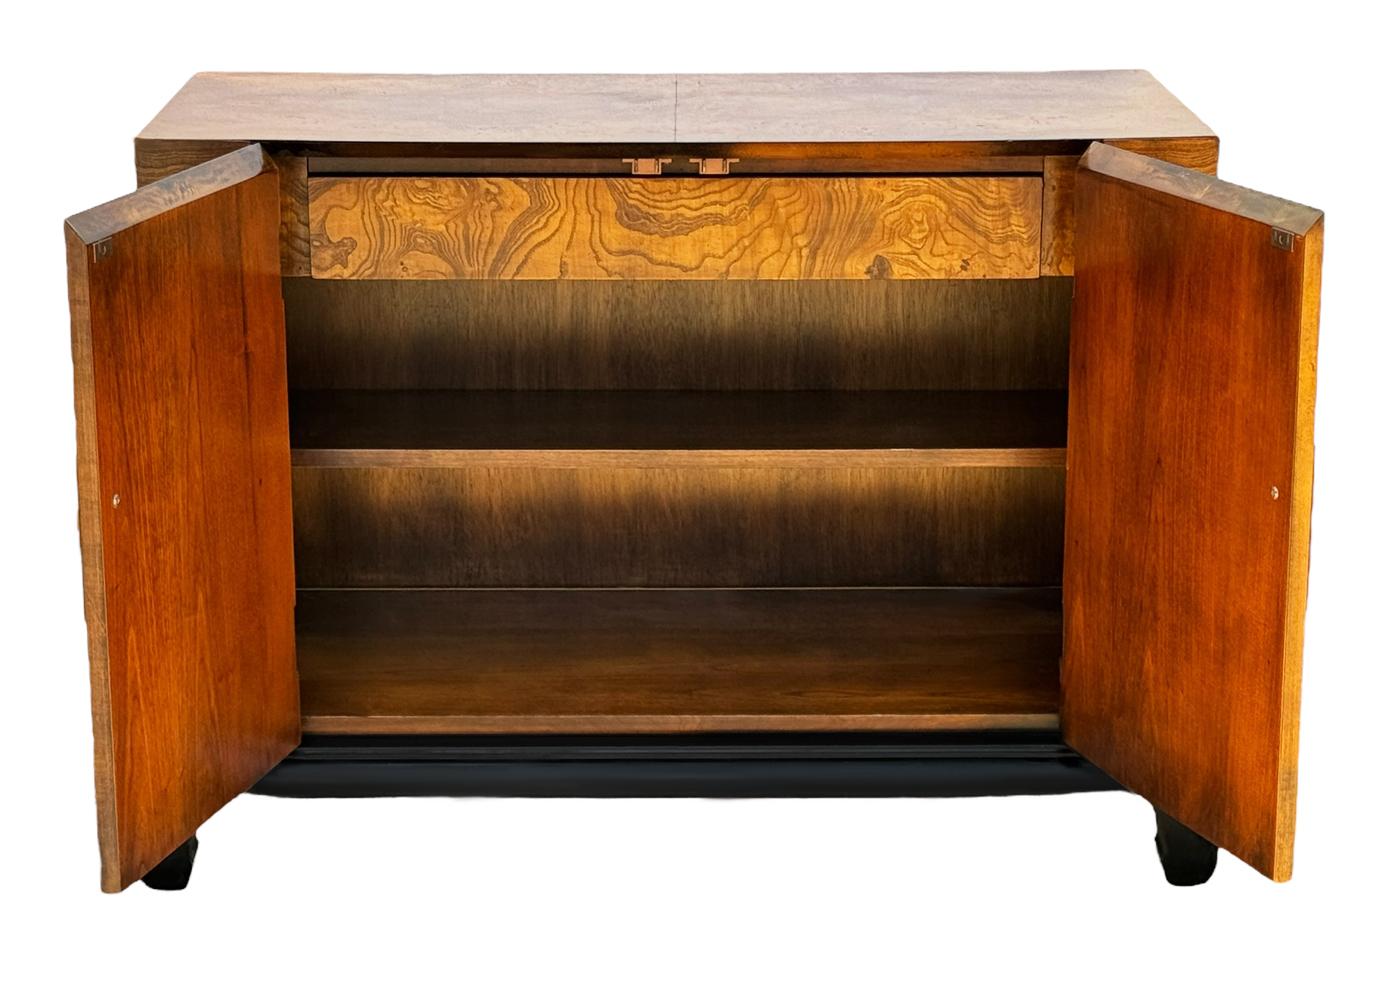 Midcentury Asian Modern Burl Wood Cabinet Credenza Hollywood Regency Chinoiserie In Good Condition For Sale In Philadelphia, PA